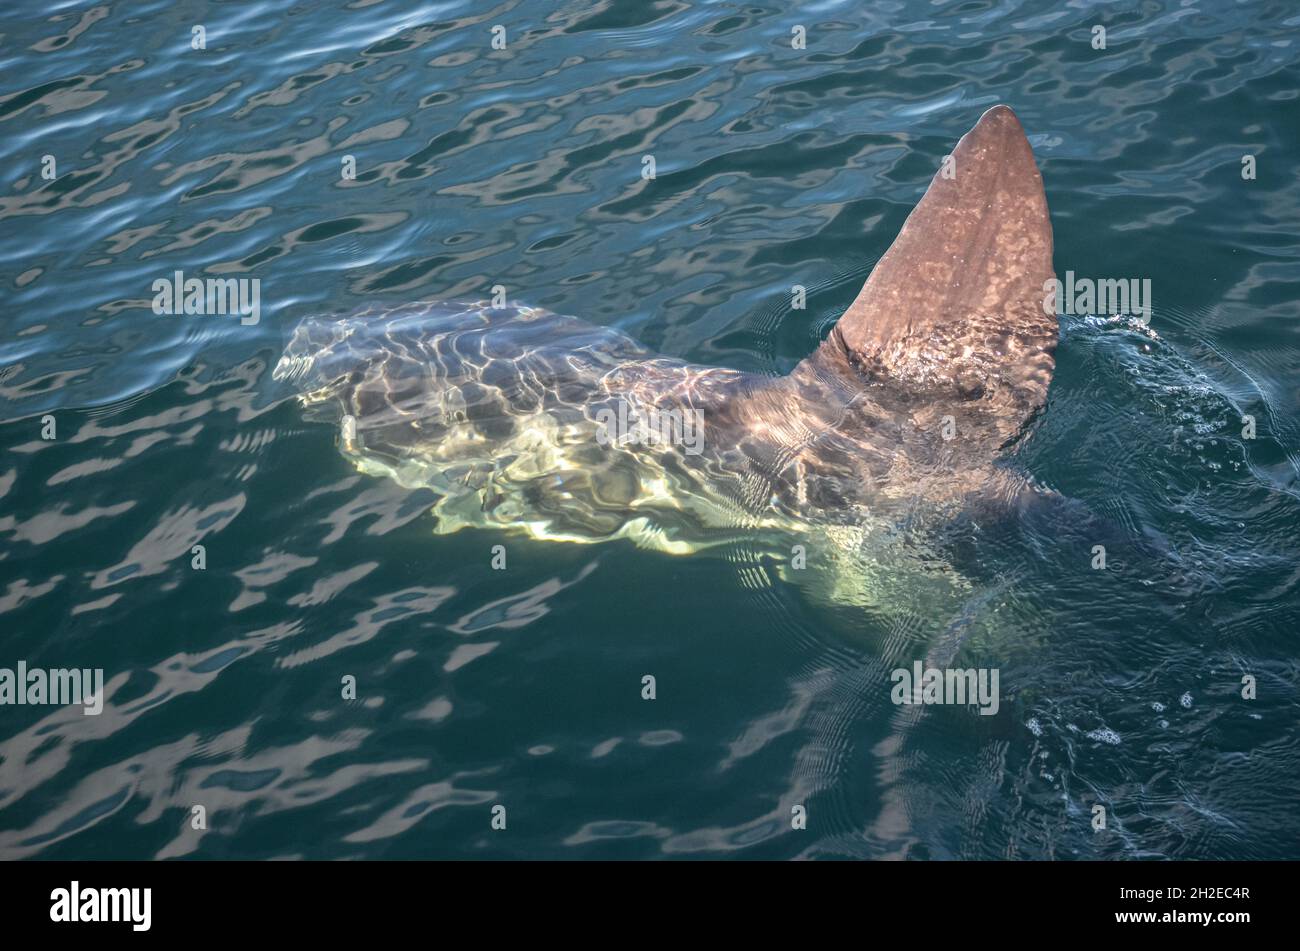 An Ocean Sunfish or Common Mola (Mola mola) as seen from above water with its large dorsal fin out of the water.  Fin is often mistake for a shark. Stock Photo